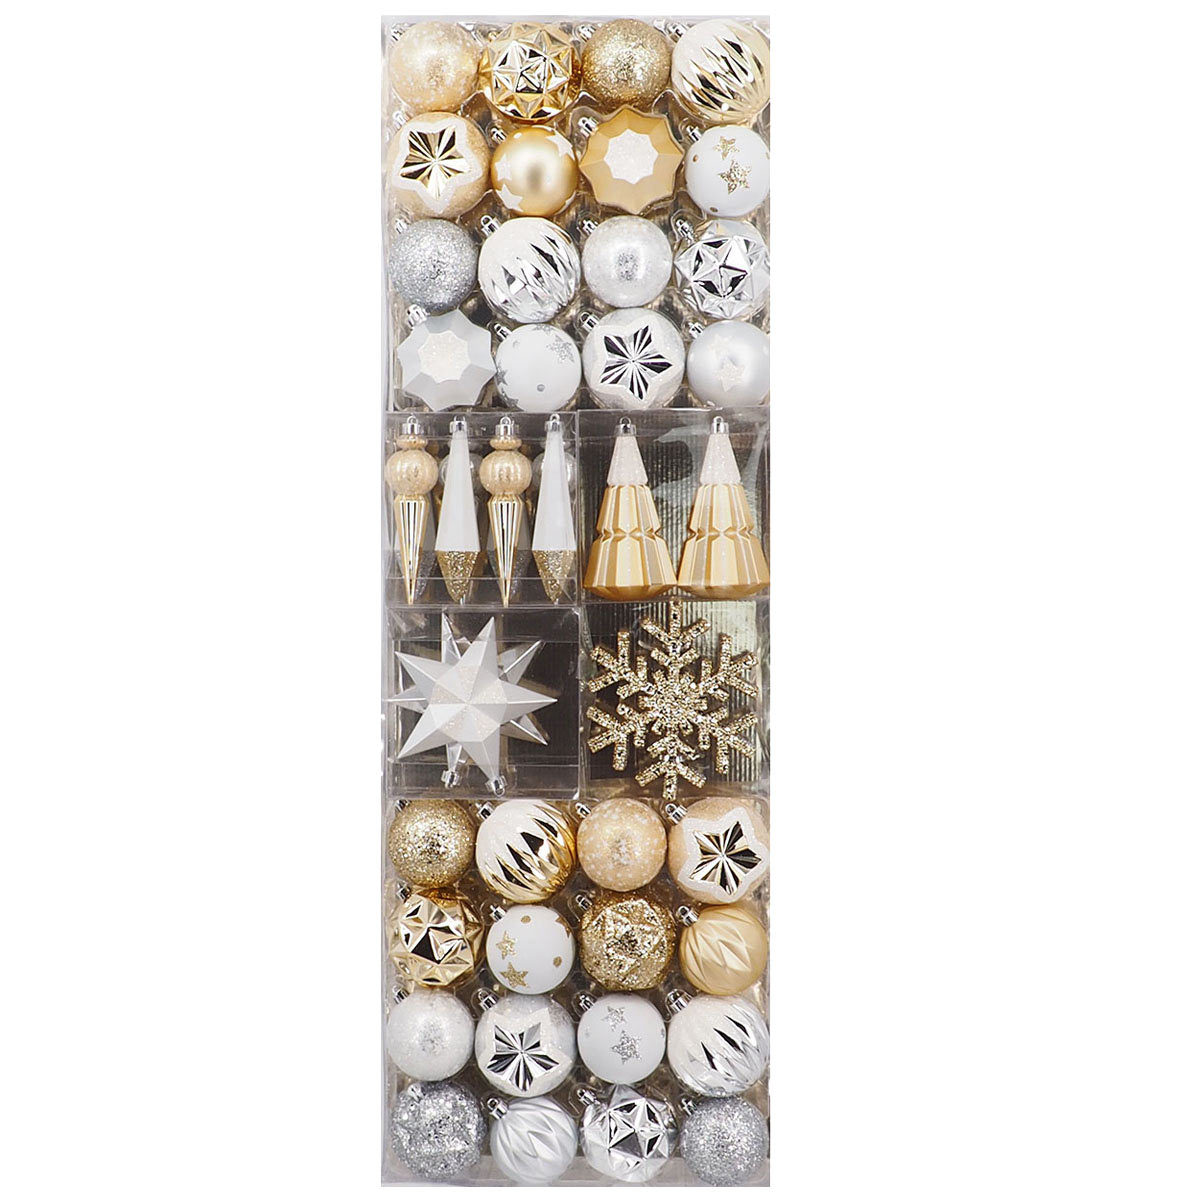 Shatter Resistant 52 Piece Ornament Set in Gold, Silver and White